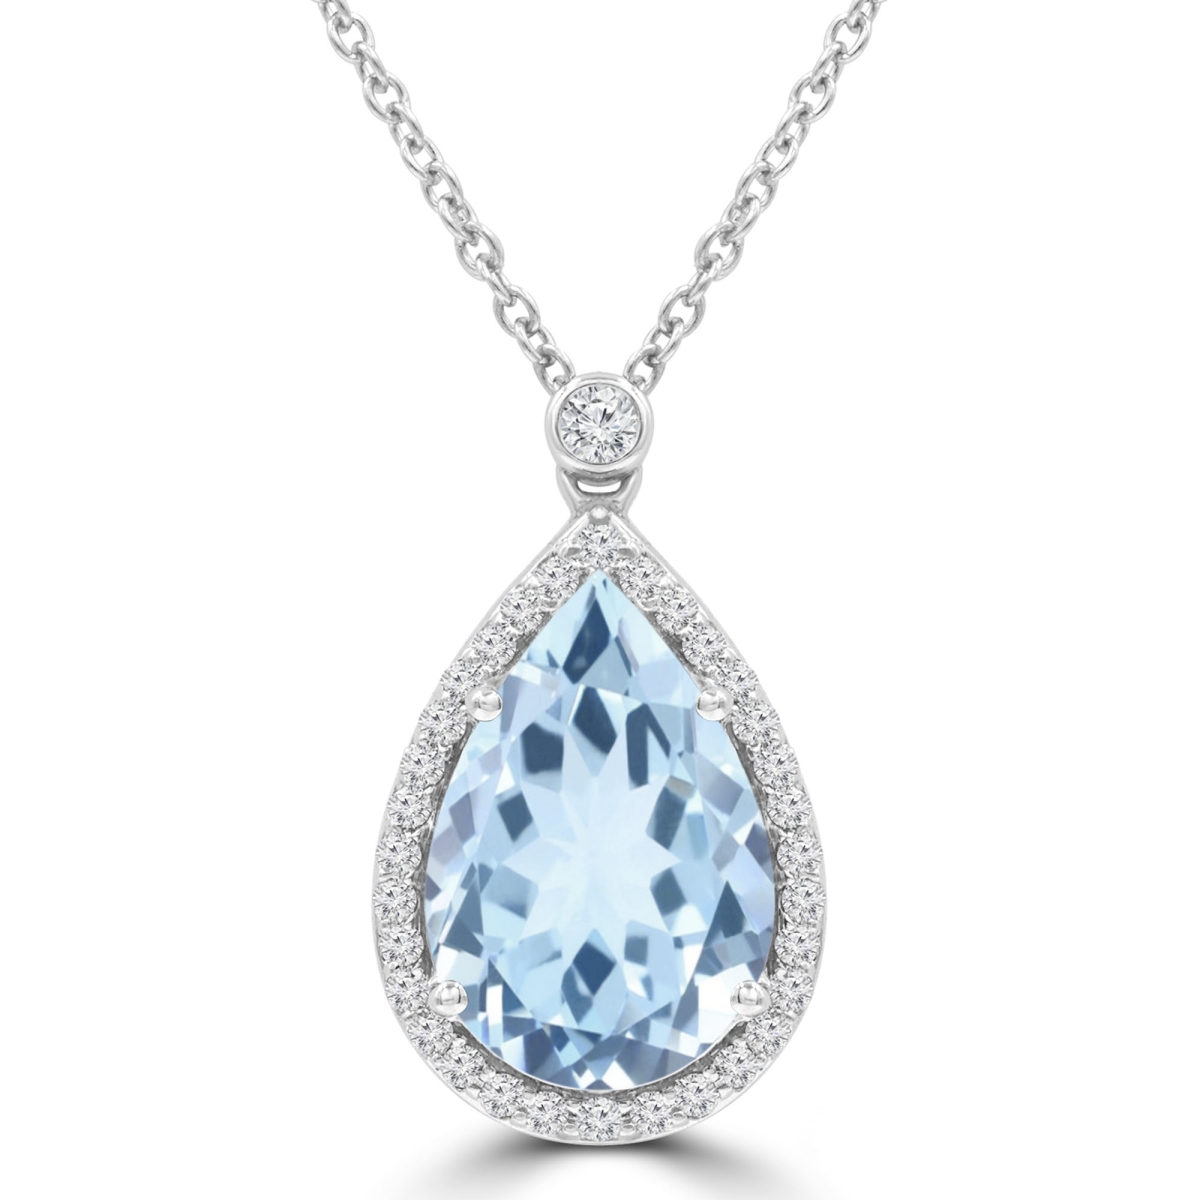 Picture of Majesty Diamonds MDR220178 3.1 CTW Pear Blue Topaz Pear Halo Pendant Necklace in 14K White Gold